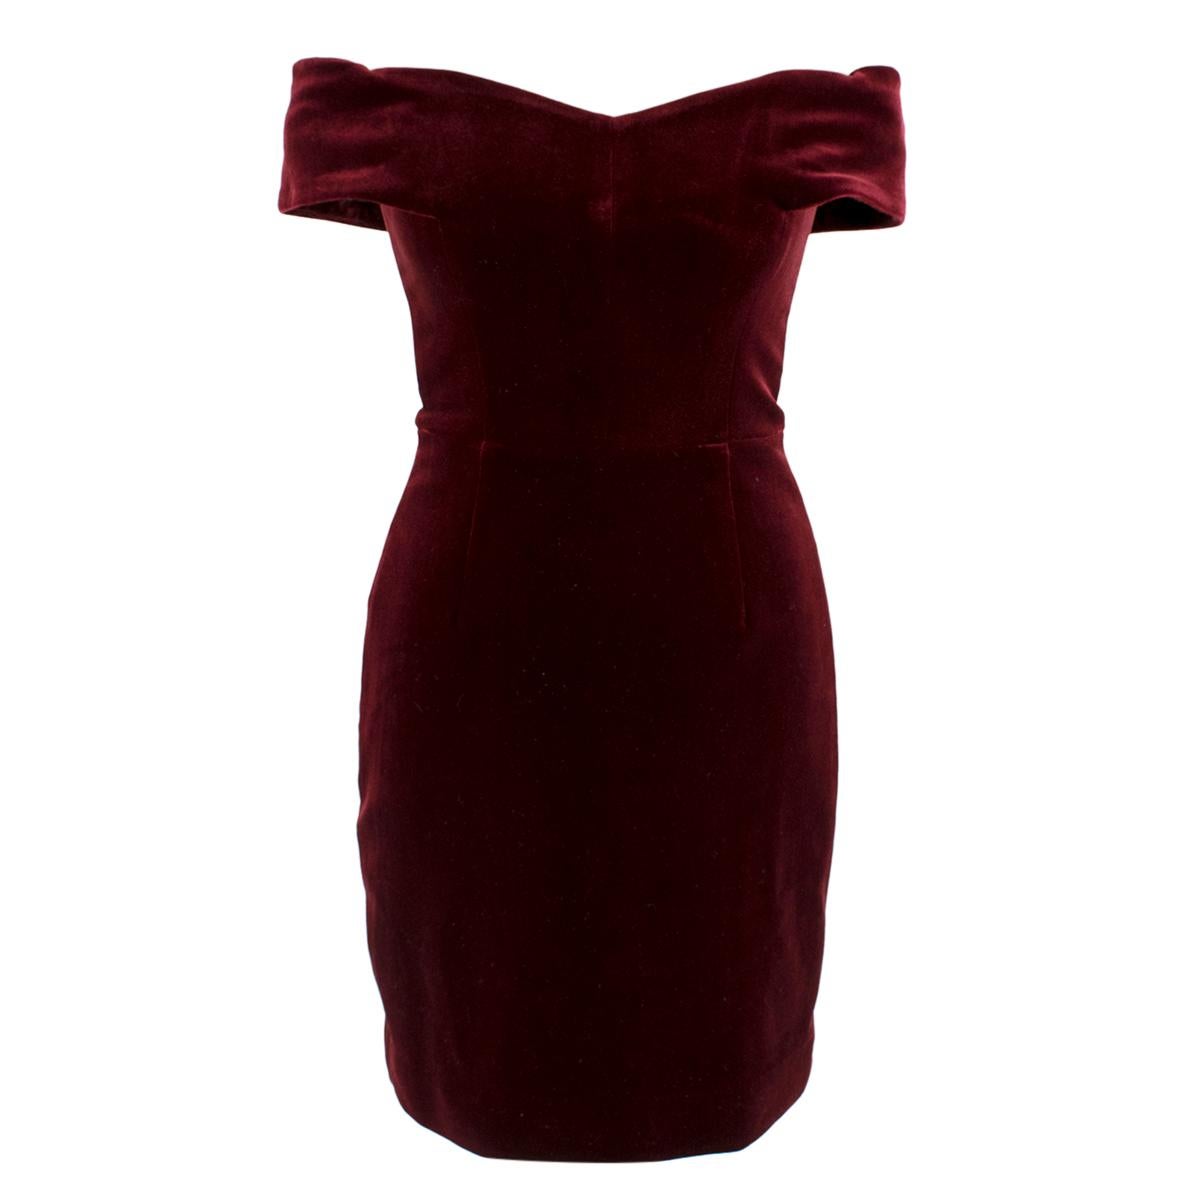 Nicholas Bordeaux Velvet Off-the-Shoulder Mini Dress

- Velvet bordeaux mini dress
- Off shoulder
- Lined 
- Interior boning for structure
- Hidden zip fastening to the back

Please note, these items are pre-owned and may show some signs of storage,